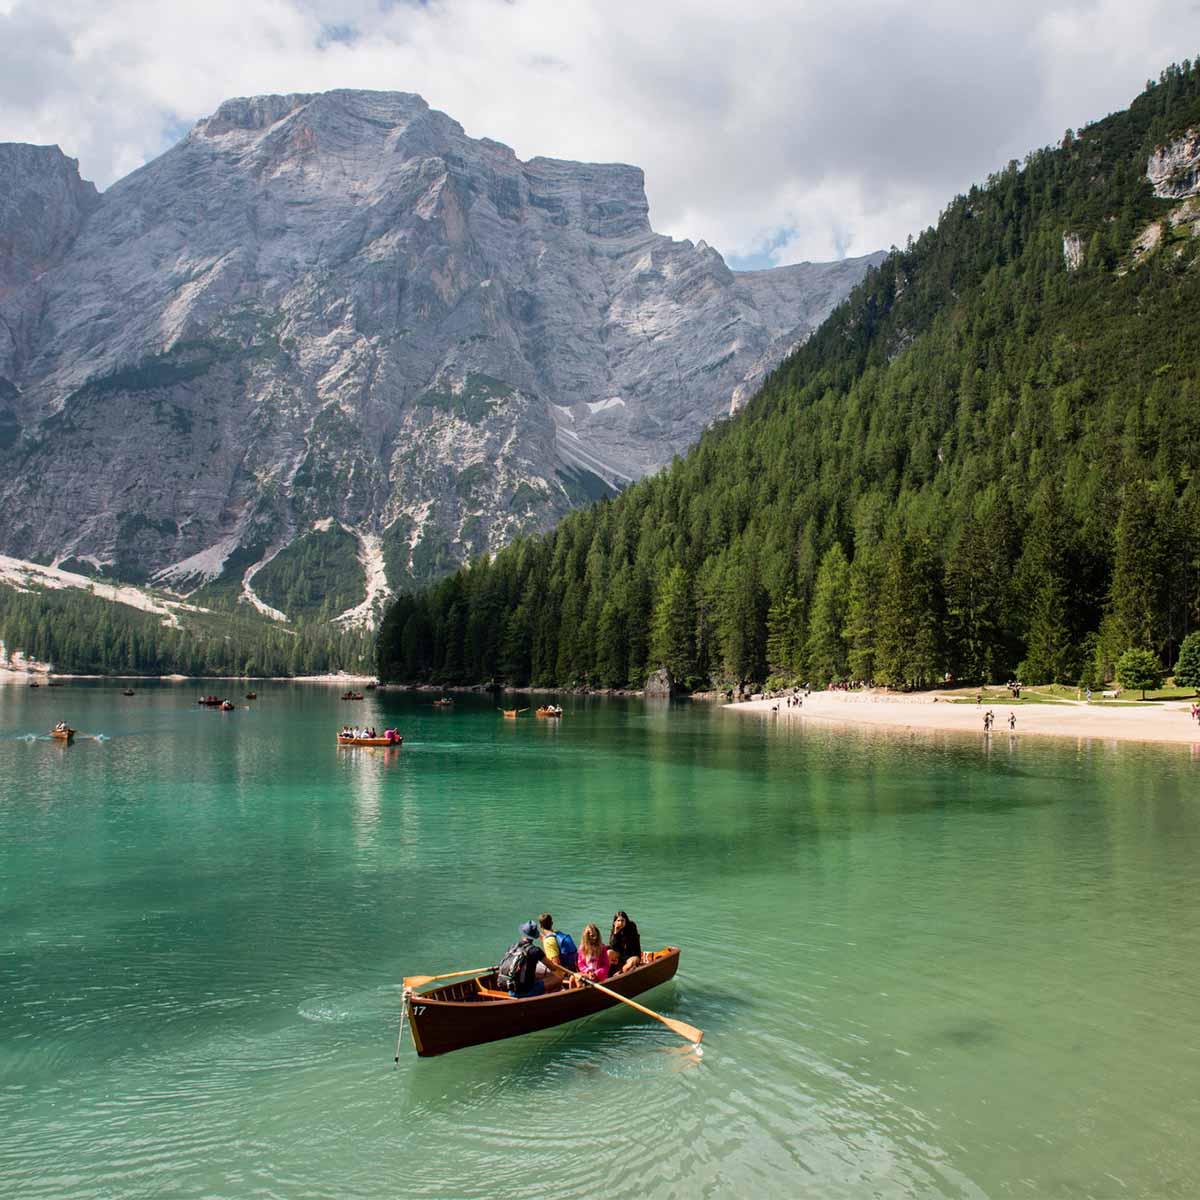 View of a lake in the Italian Dolomites